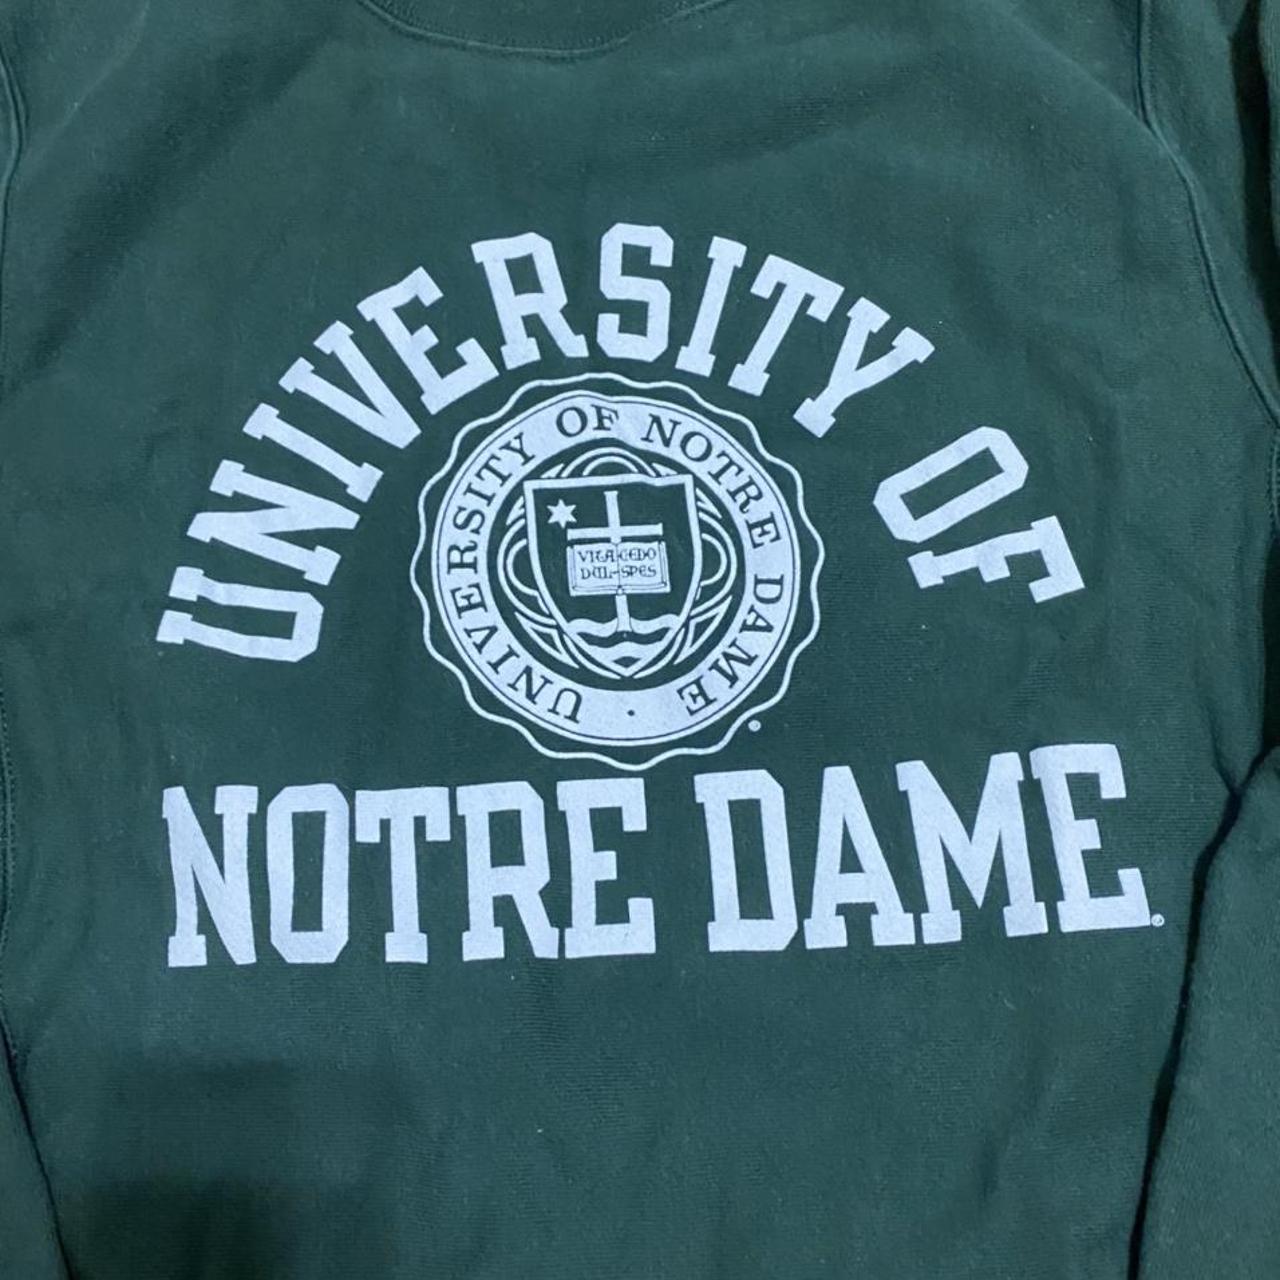 Product Image 2 - Green University of Notre Dame